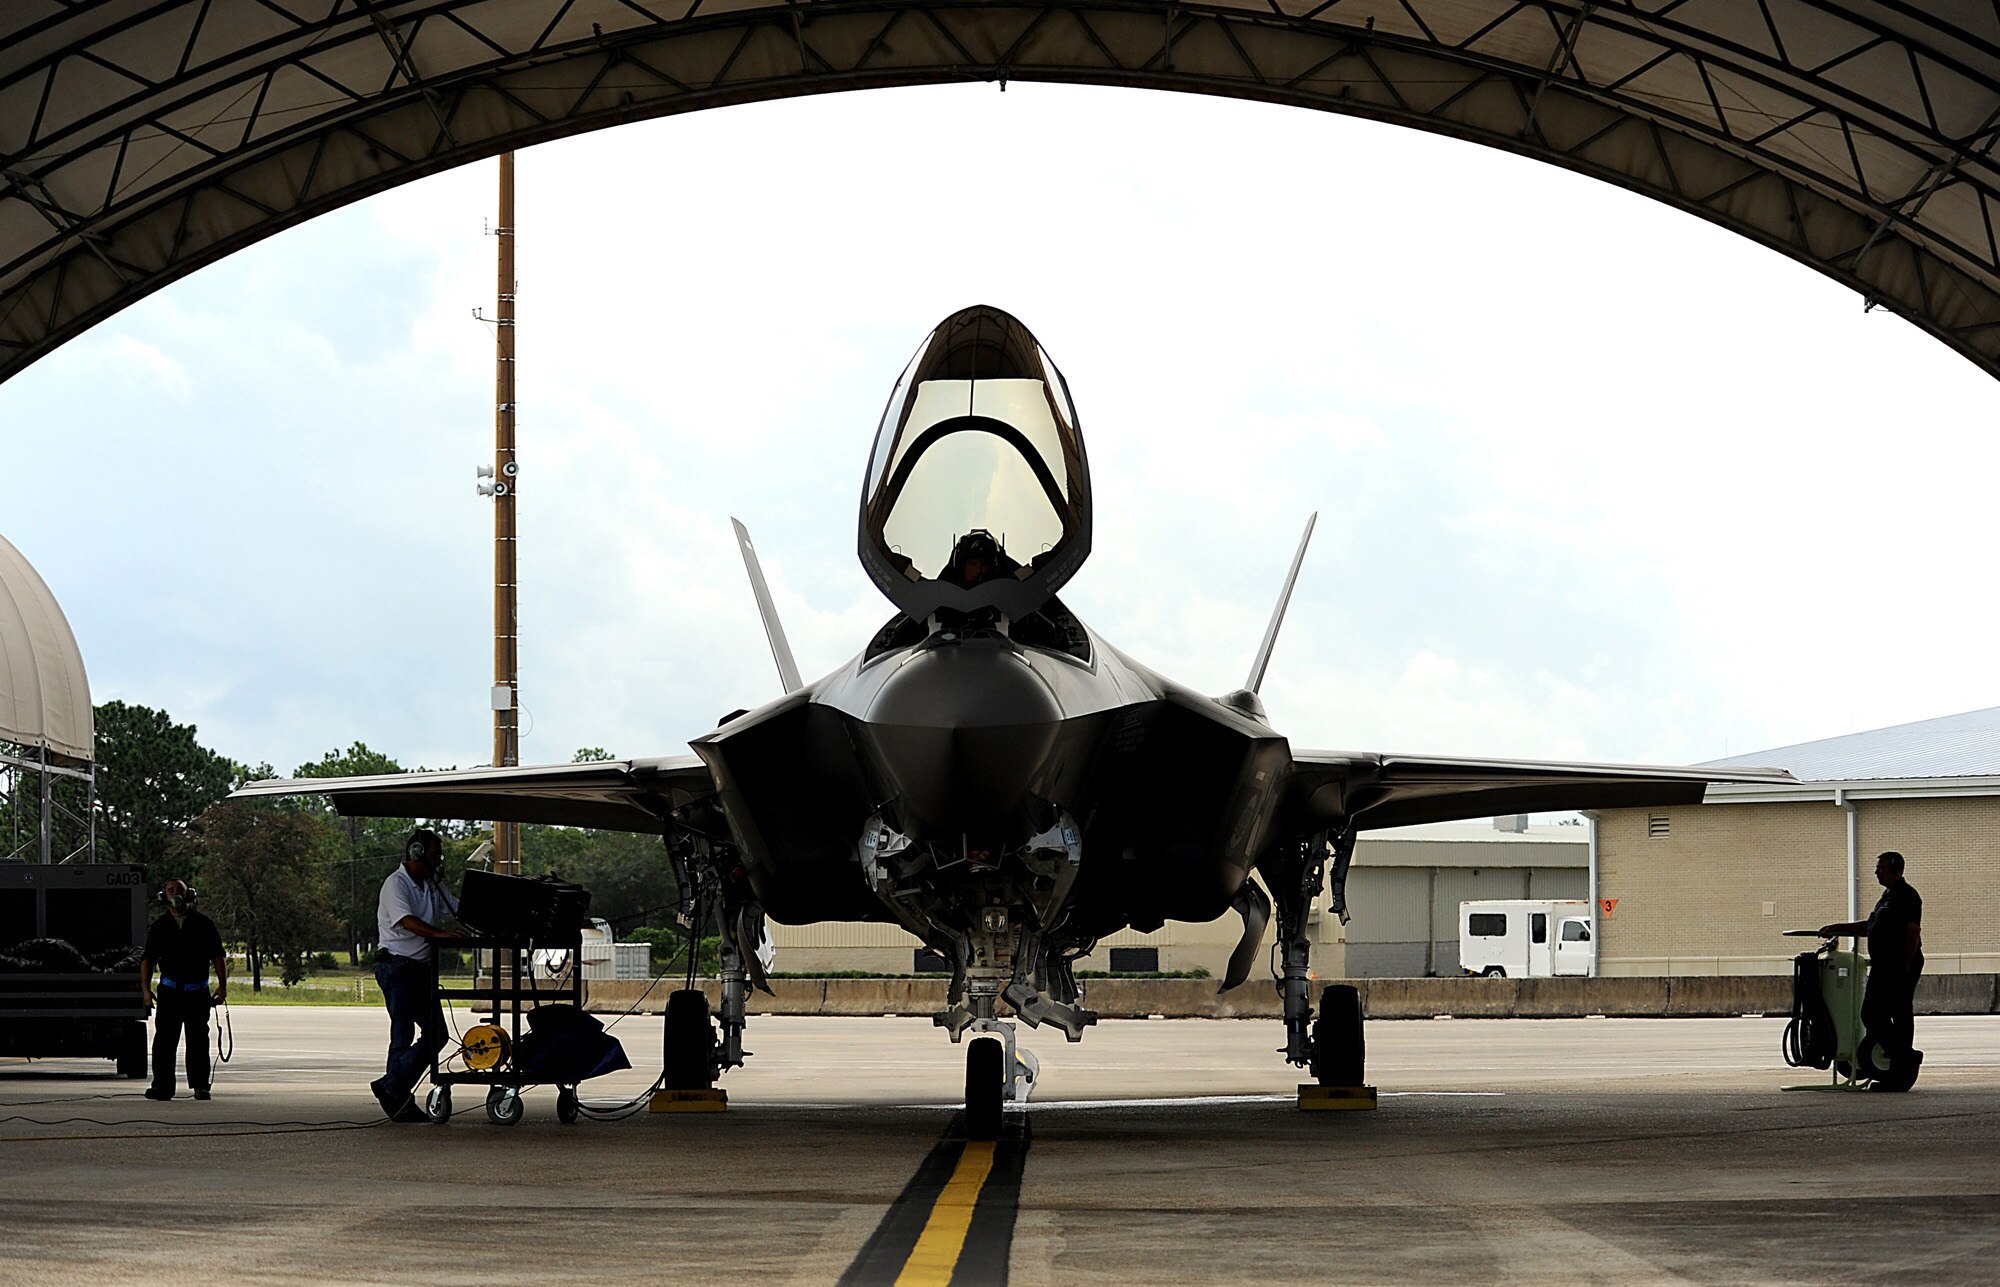 F-35A Lightning II joint strike fighter maintainers from the 58th Aircraft Maintenance Unit at Eglin Air Force Base, Fla., preflight the jet before taking off for a local training mission over the Emerald Coast Sept. 18, 2012.  (U.S. Air Force photo/Master Sgt. Jeremy T. Lock)